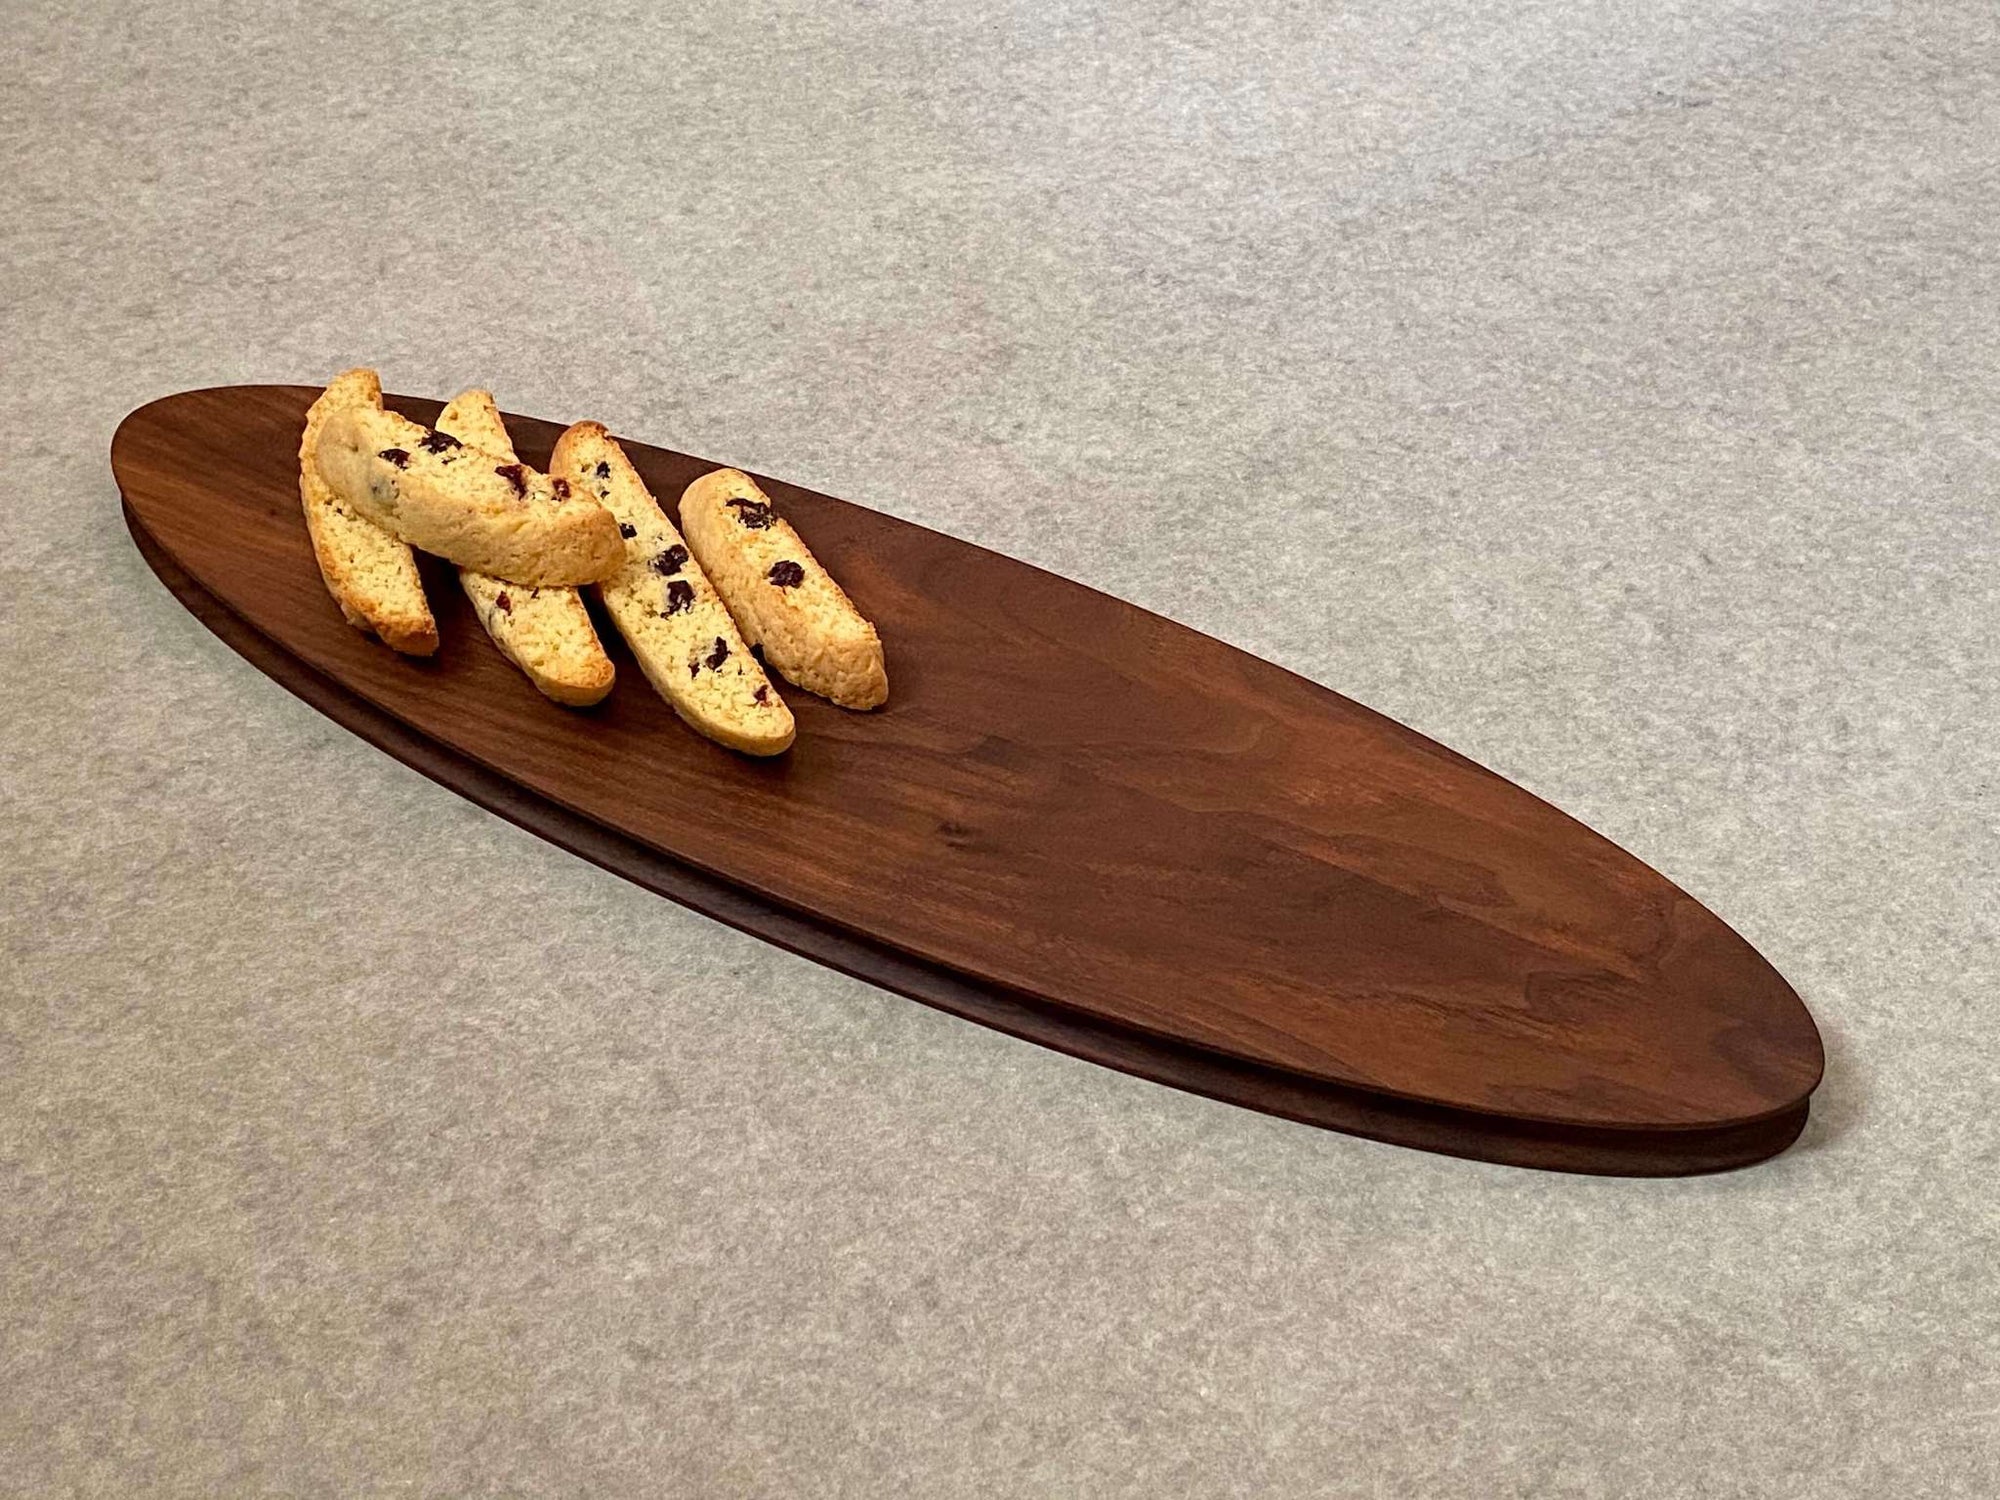 Long oval cutting and serving board made of walnut. Sculpted edges add a nice detail.